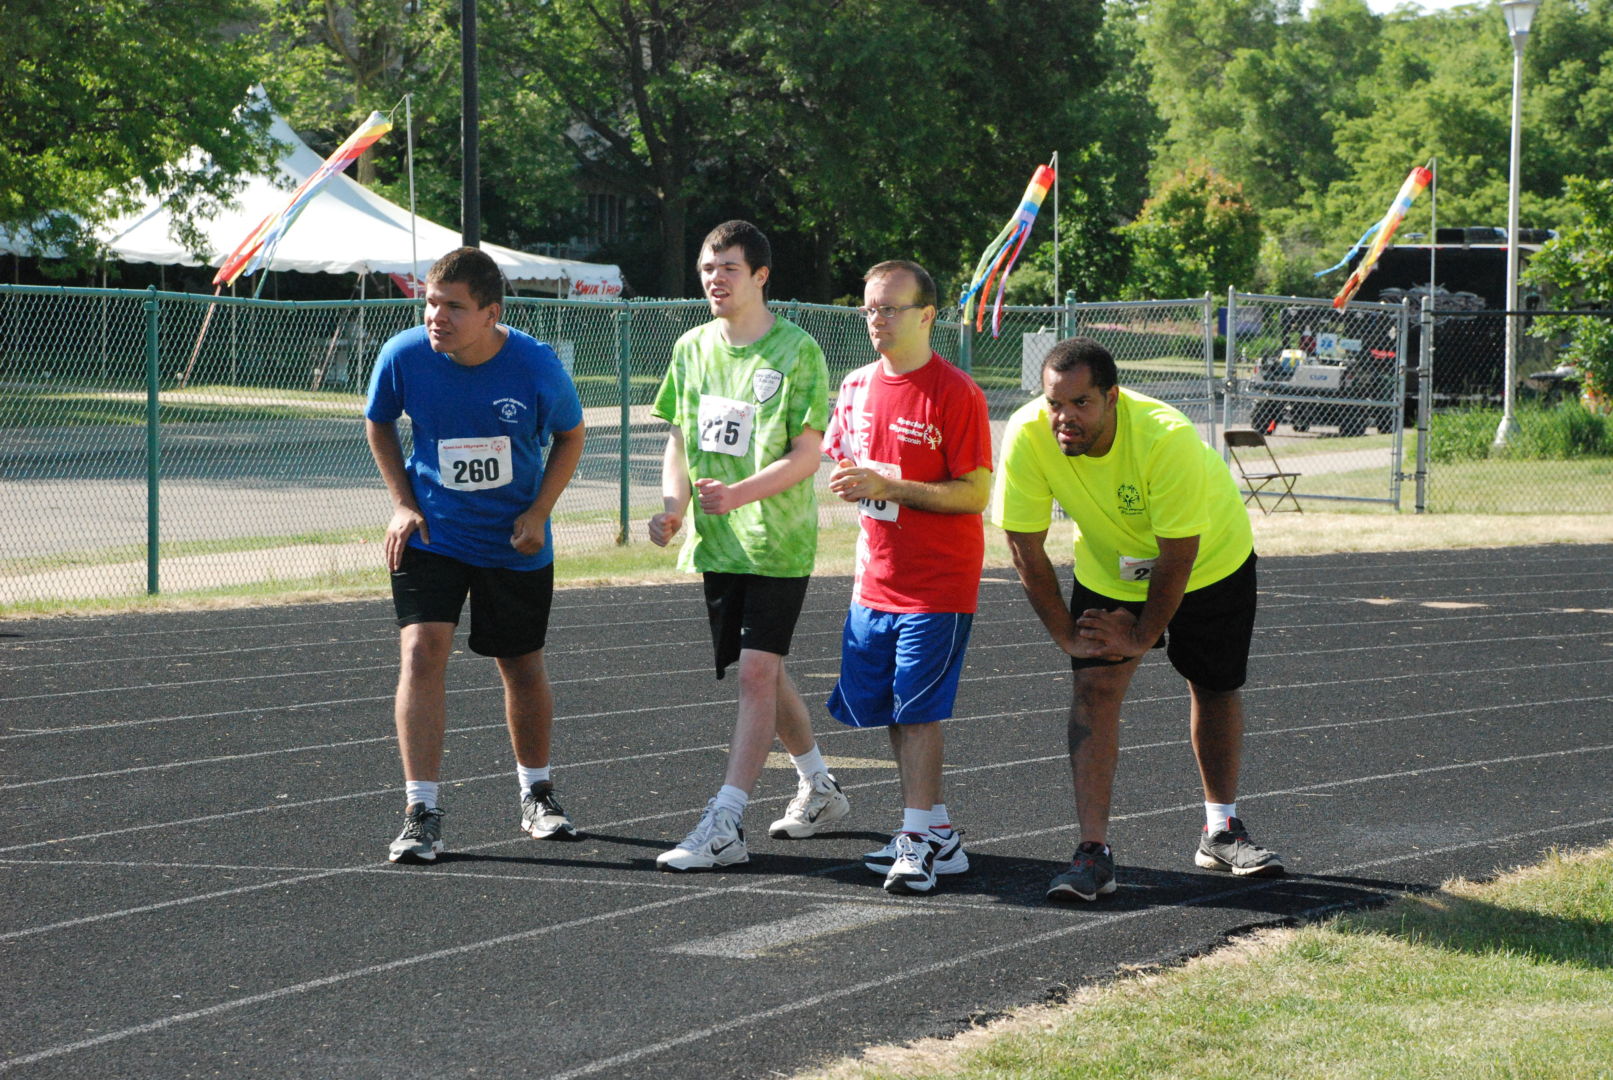 Shilts (far left) prepares for a race at the 2017 State Summer Games